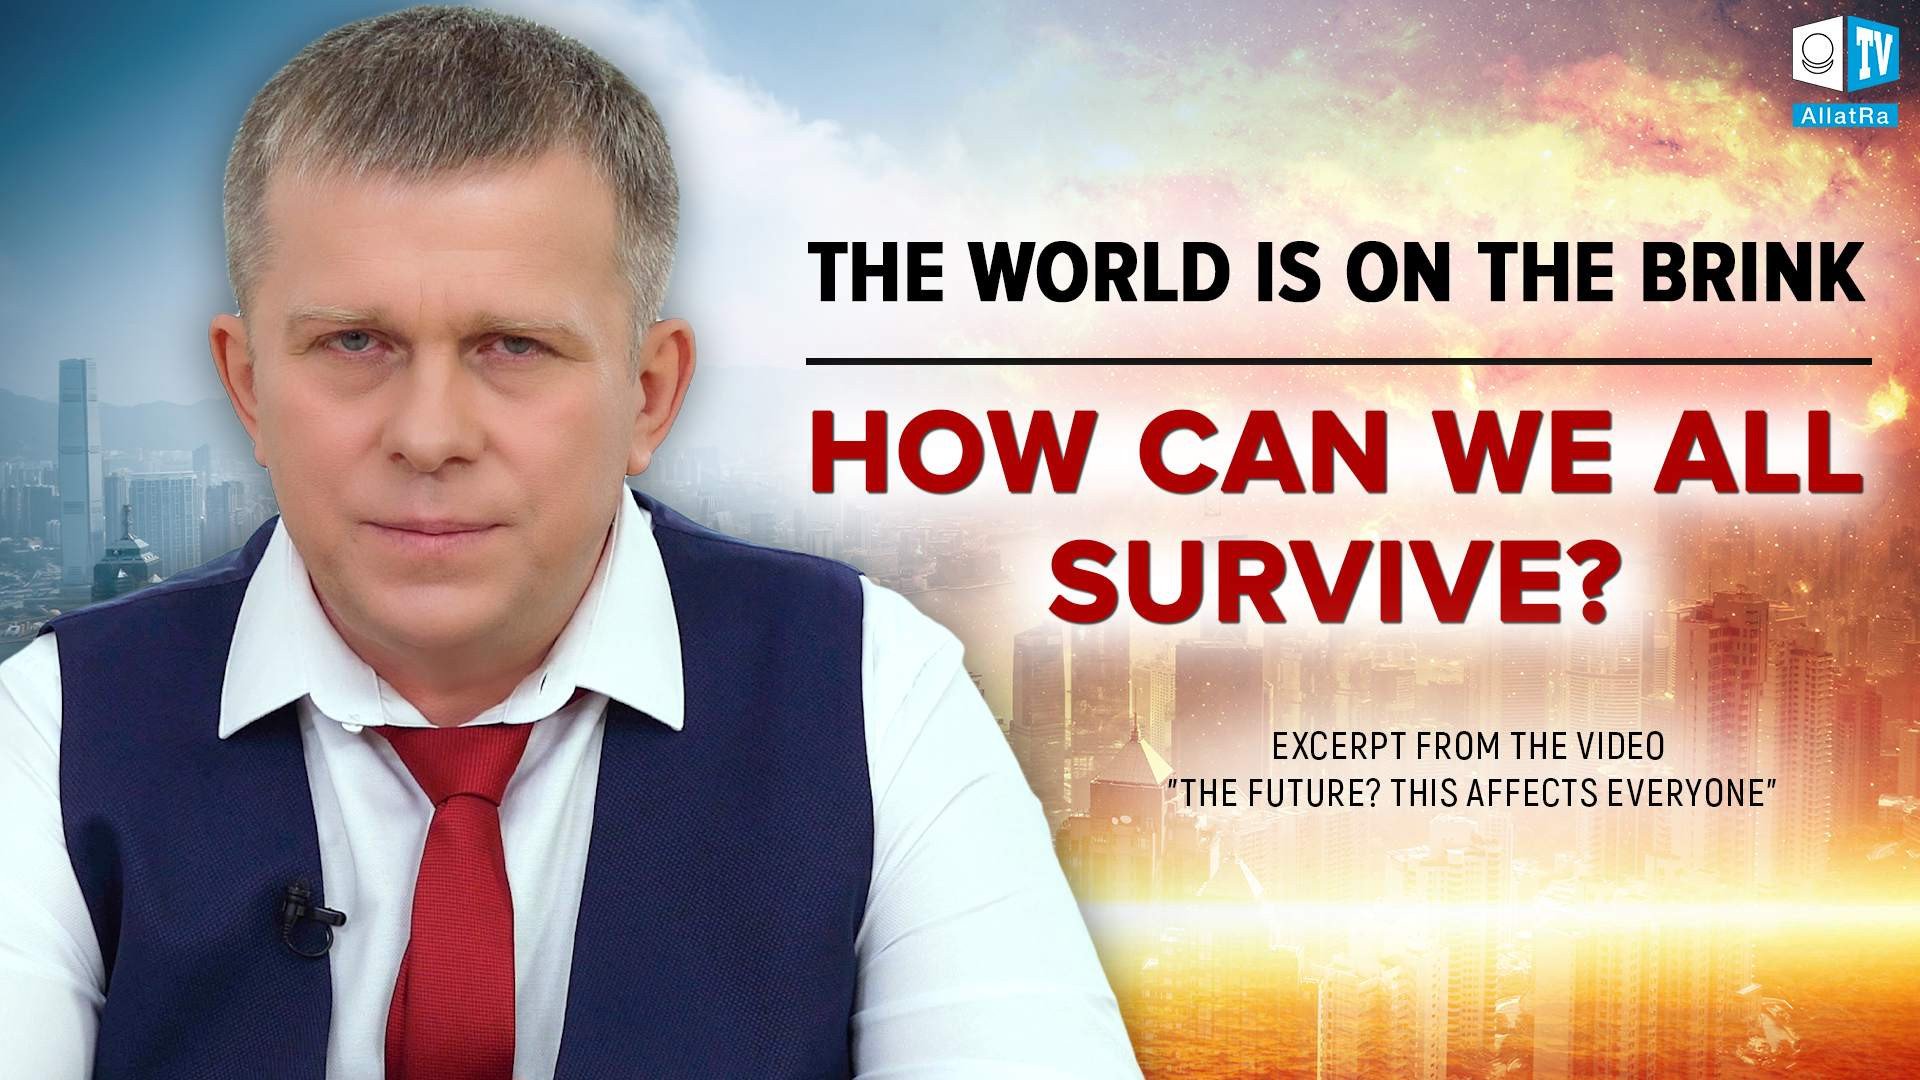 The World is on the Brink. How Can We All Survive?